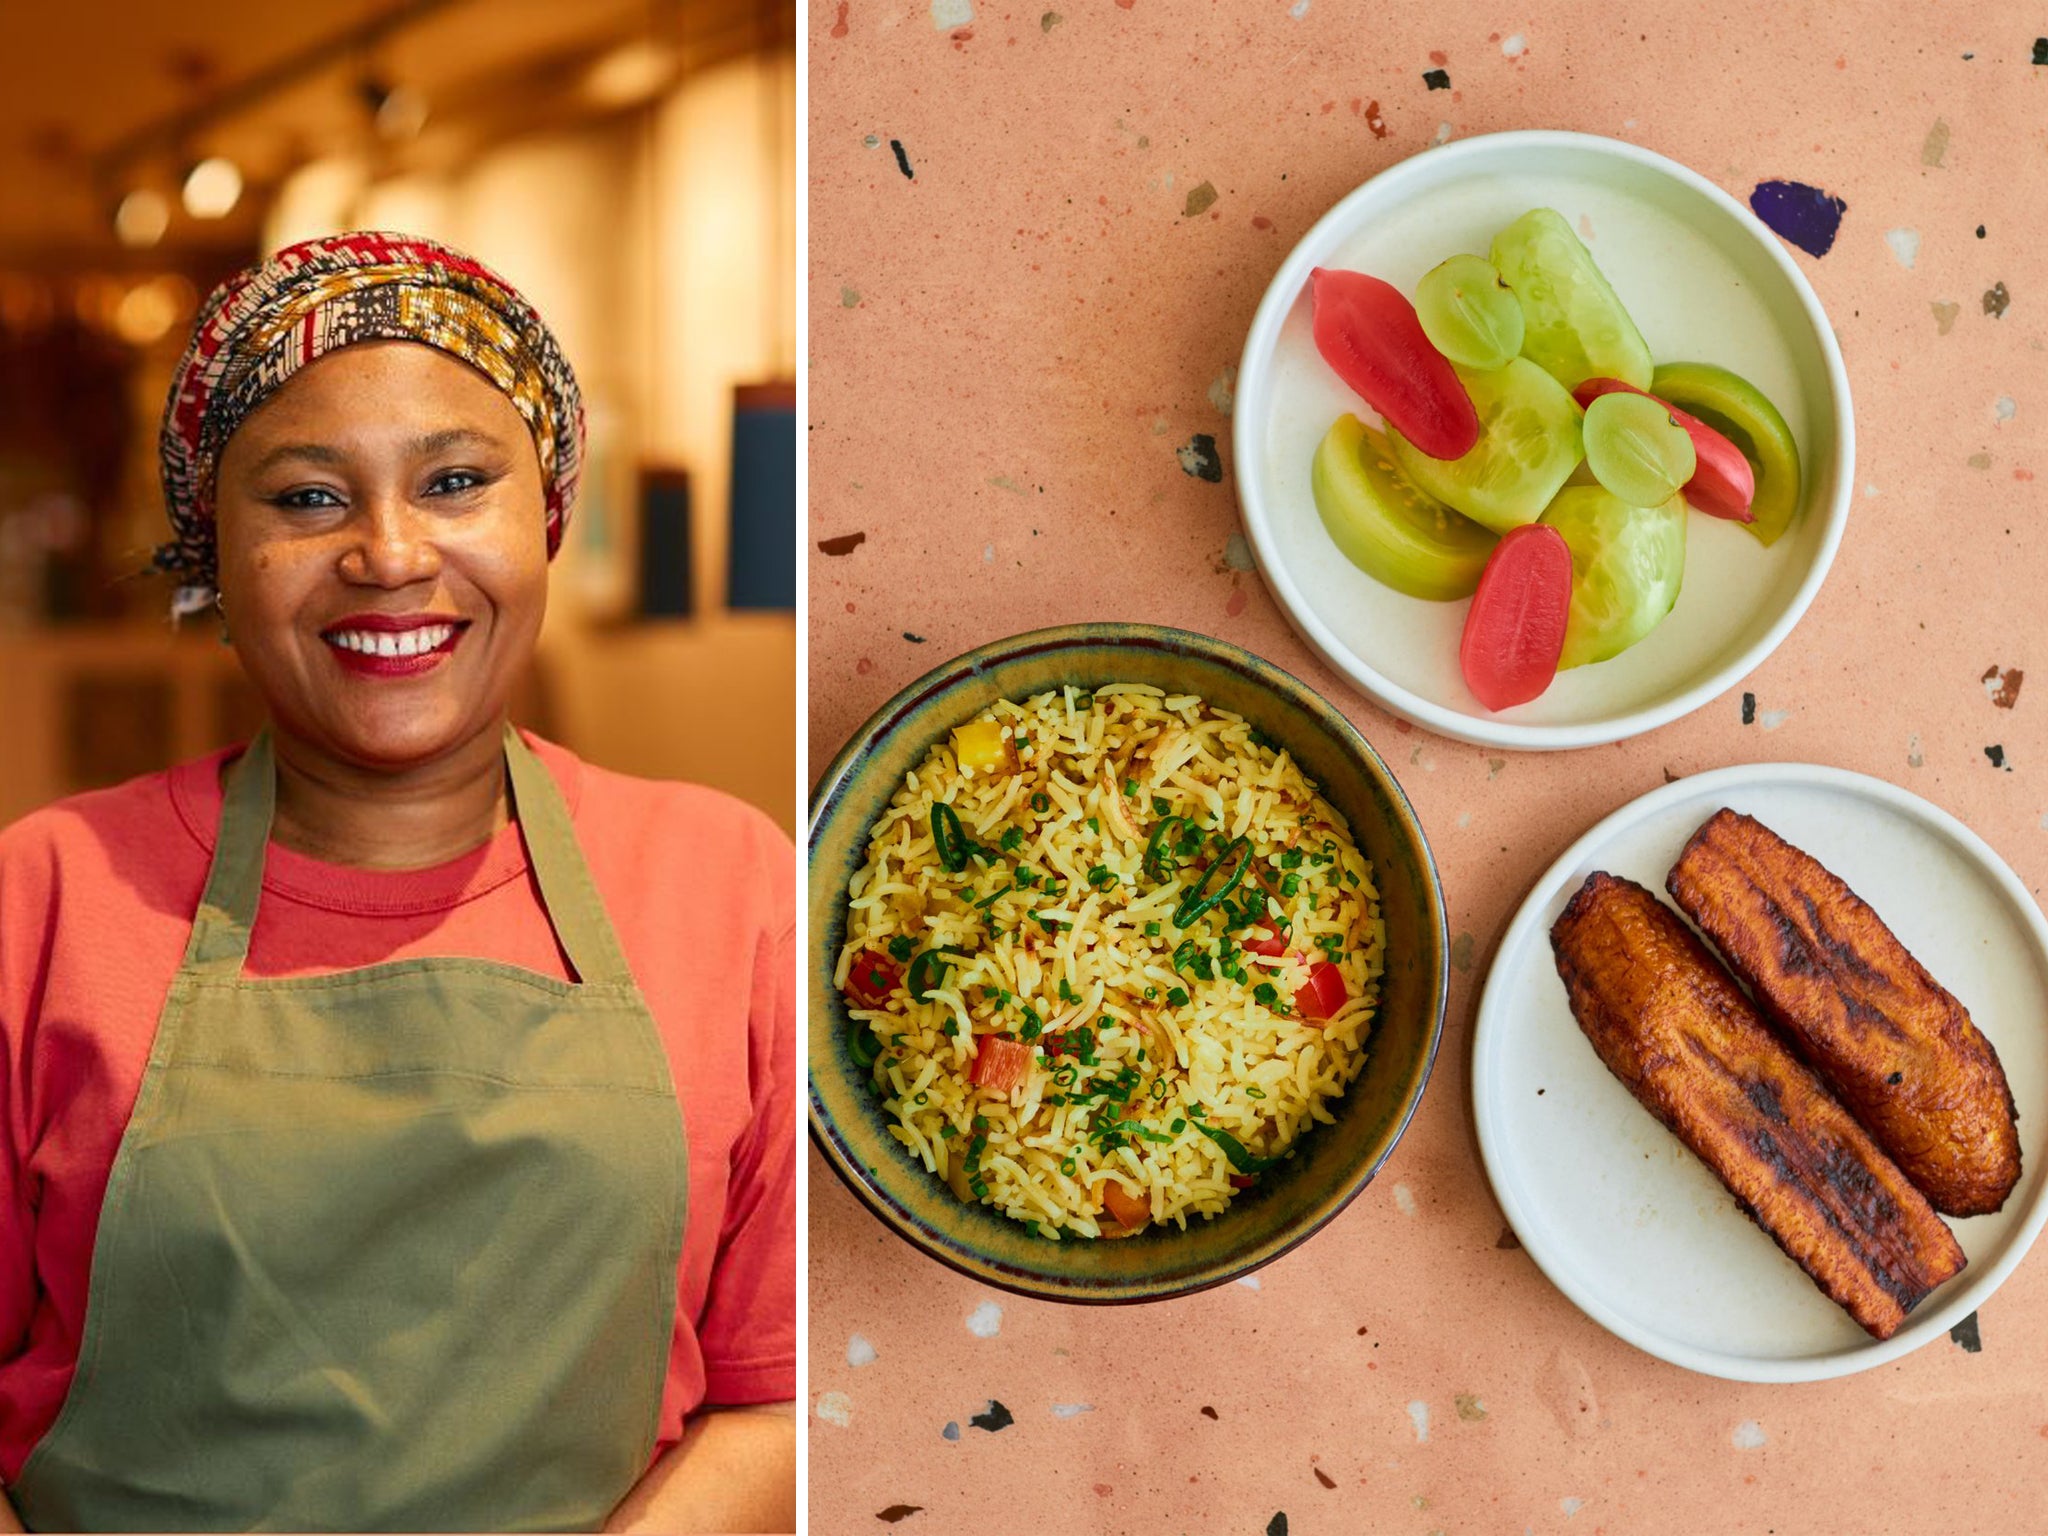 Adejoké ‘Joké’ Bakare became the first black female Michelin-starred chef, with Chishuru becoming one of two African restaurants in the UK to make the list for the first time